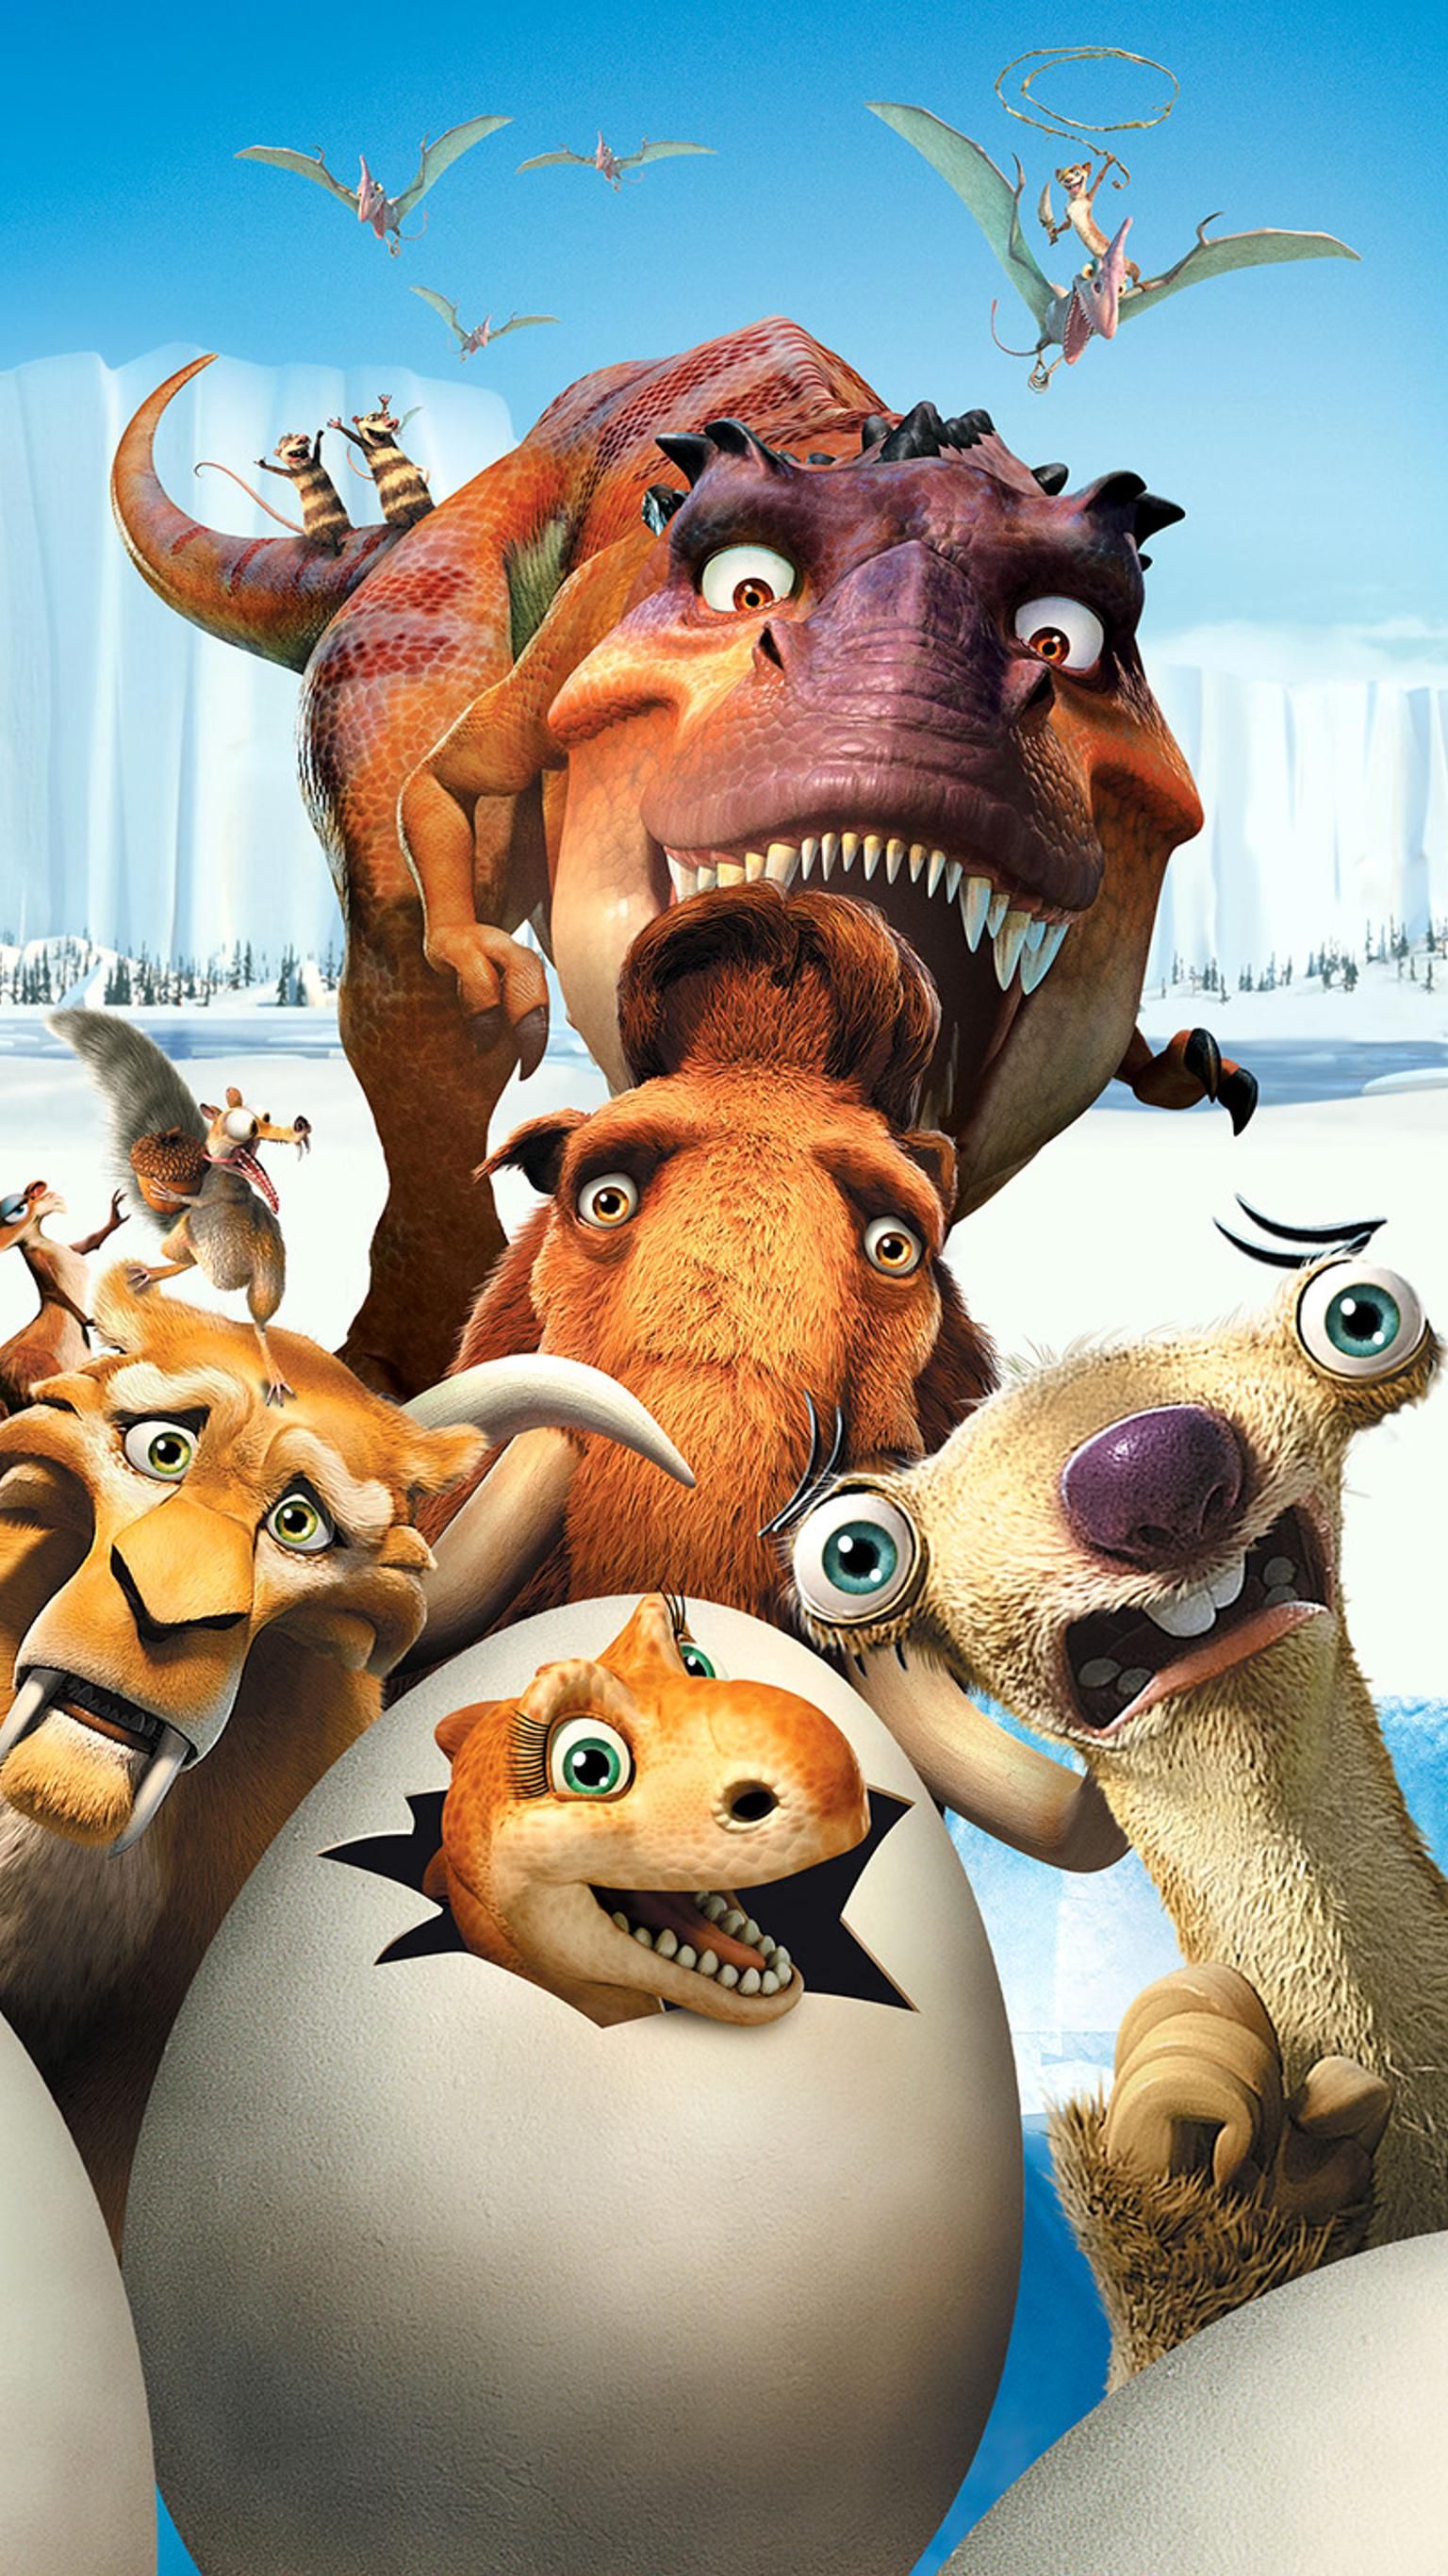 Ice Age: Dawn of the Dinosaurs (2009) Phone Wallpaper. Moviemania. Disney wallpaper, Ice age, Disney art